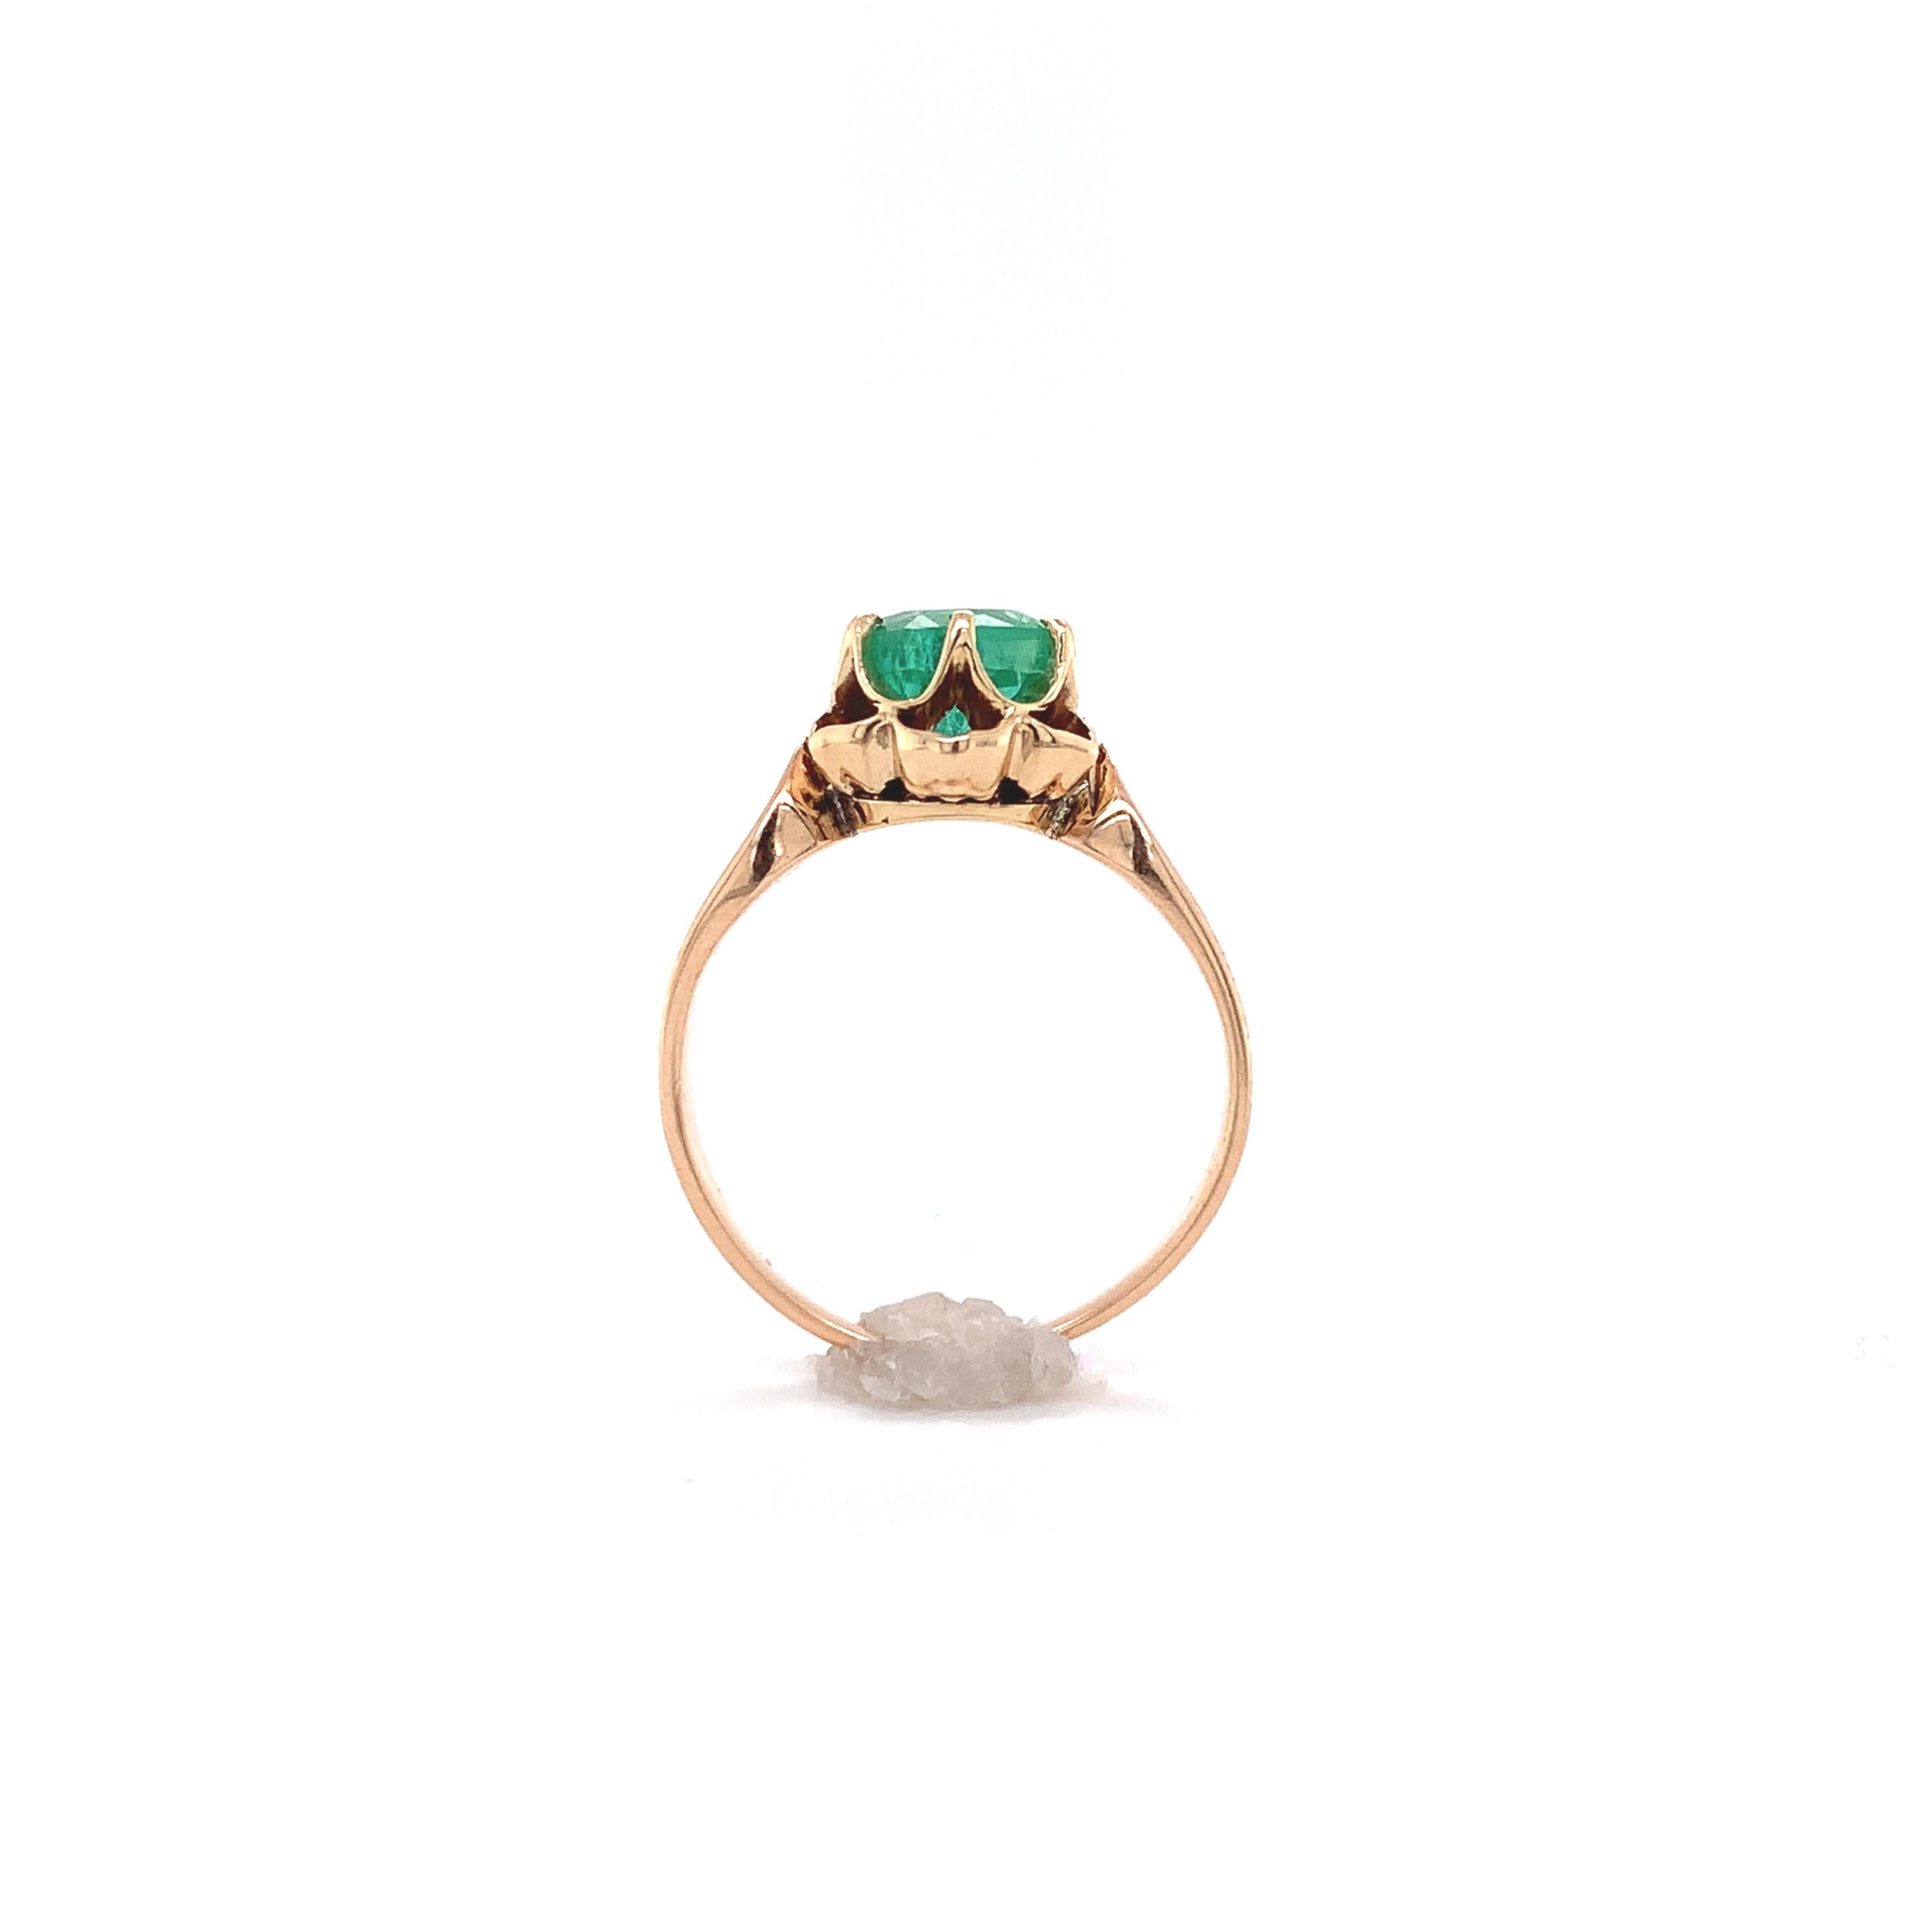 Victorian 14K yellow/rosy gold ring featuring a genuine earth mined emerald weighing .94cts. The round emerald is a lighter bright mint green color and measures about 5.9mm. The ring fits a size 4.5 finger, weighs 1.80dwt. and dates from the 1890's.